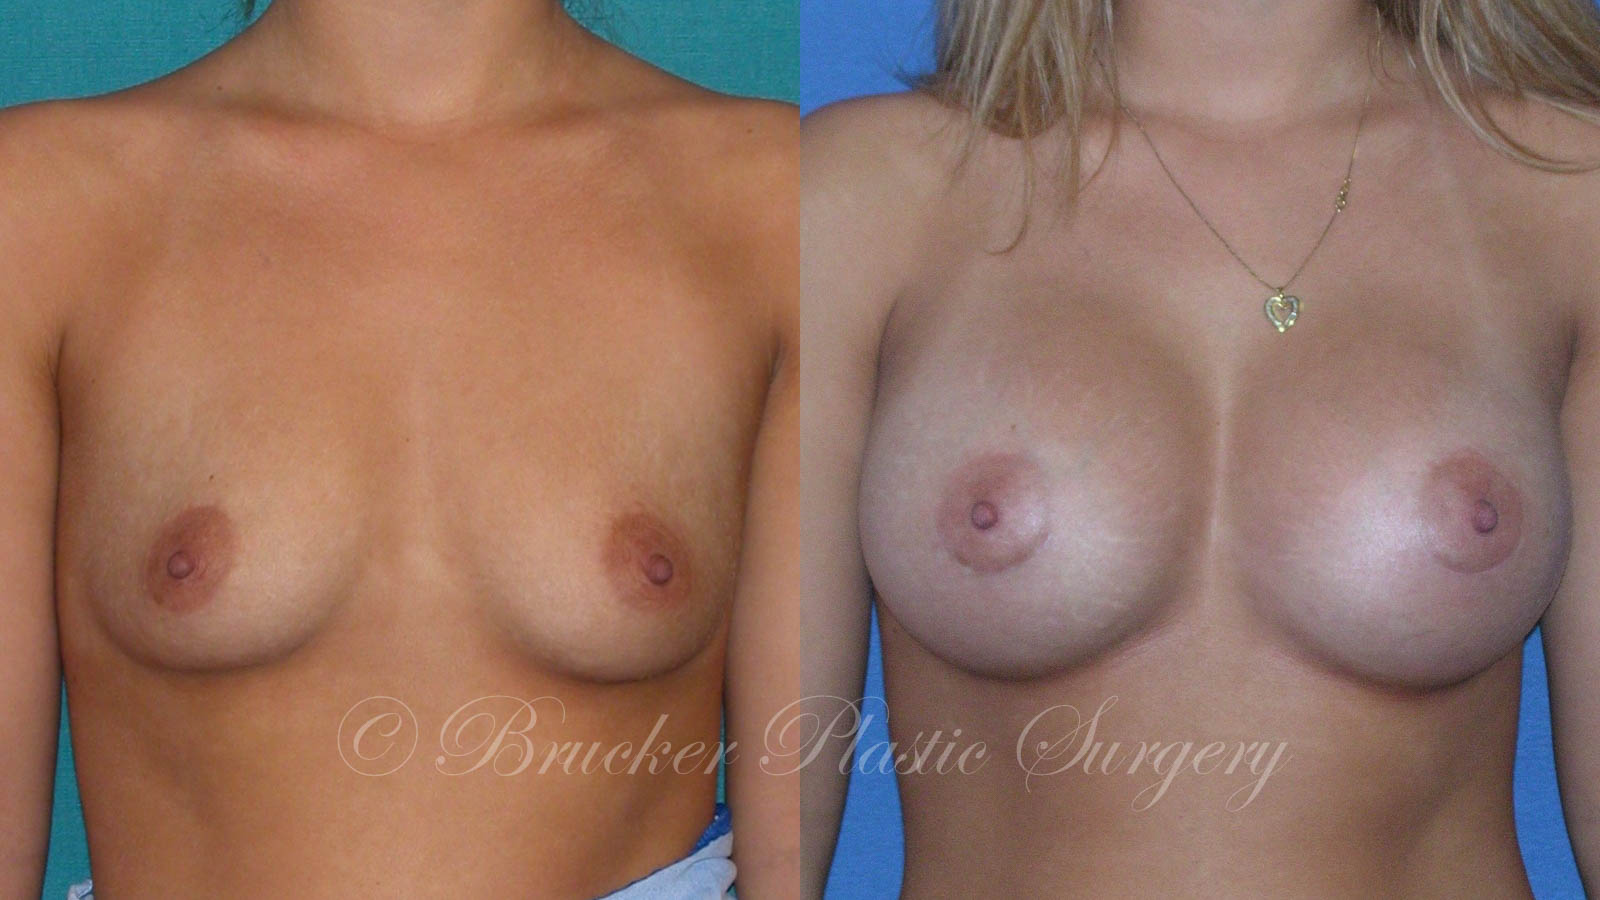 Patient 3a Breast Augmentation Before and After